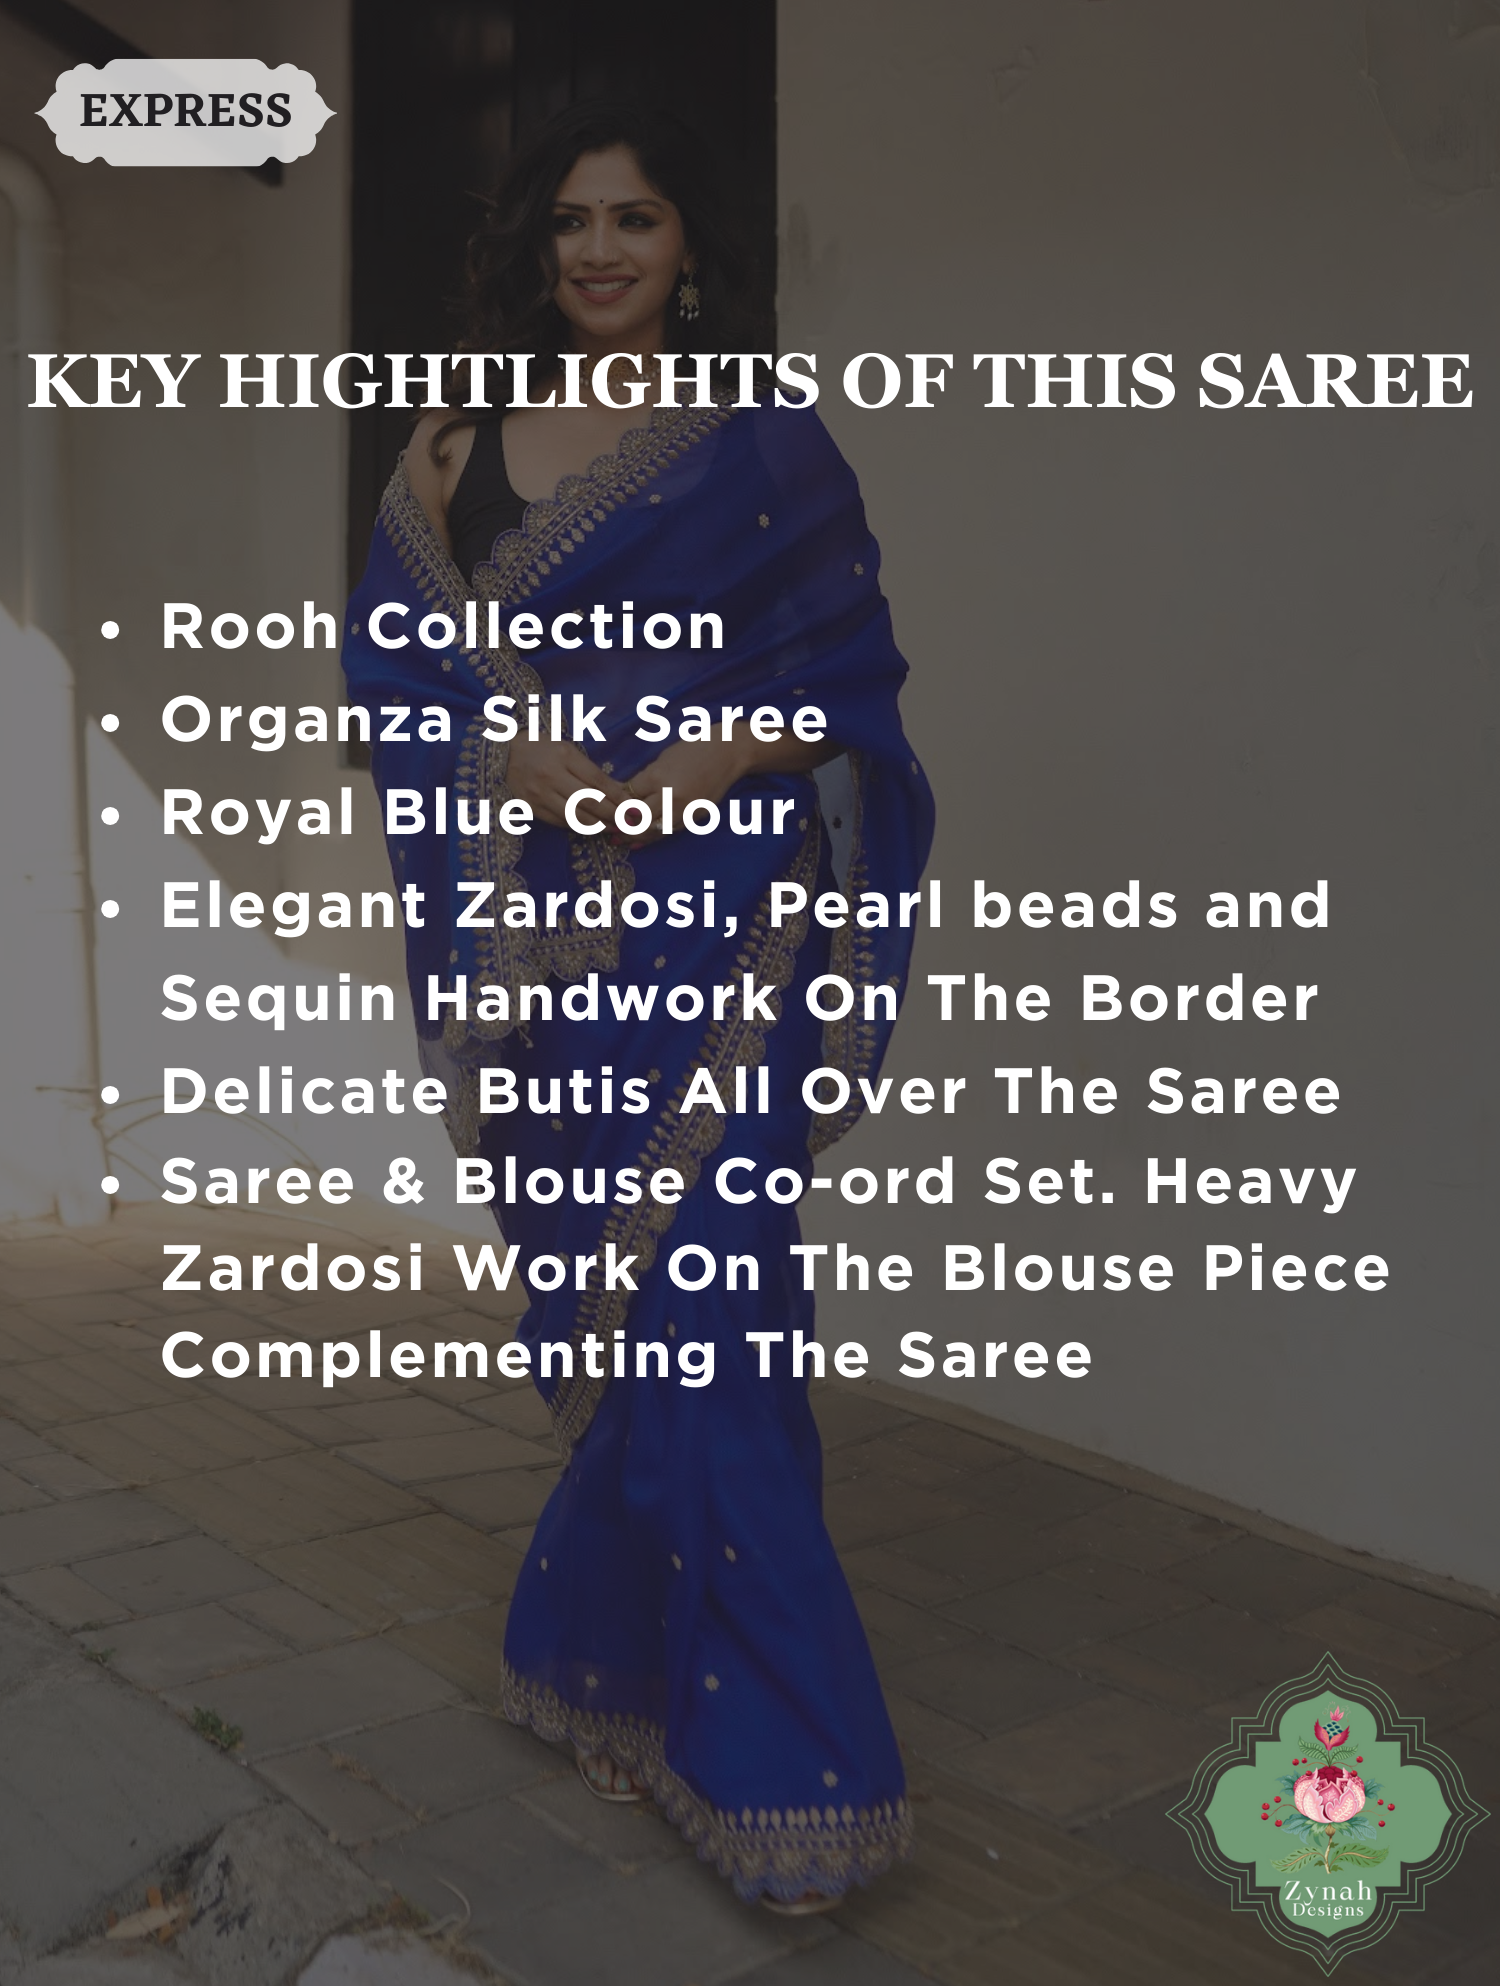 Royal Blue Pure Organza Silk Saree with Zardozi, Pearl beads and Sequins Hand Embroidery2